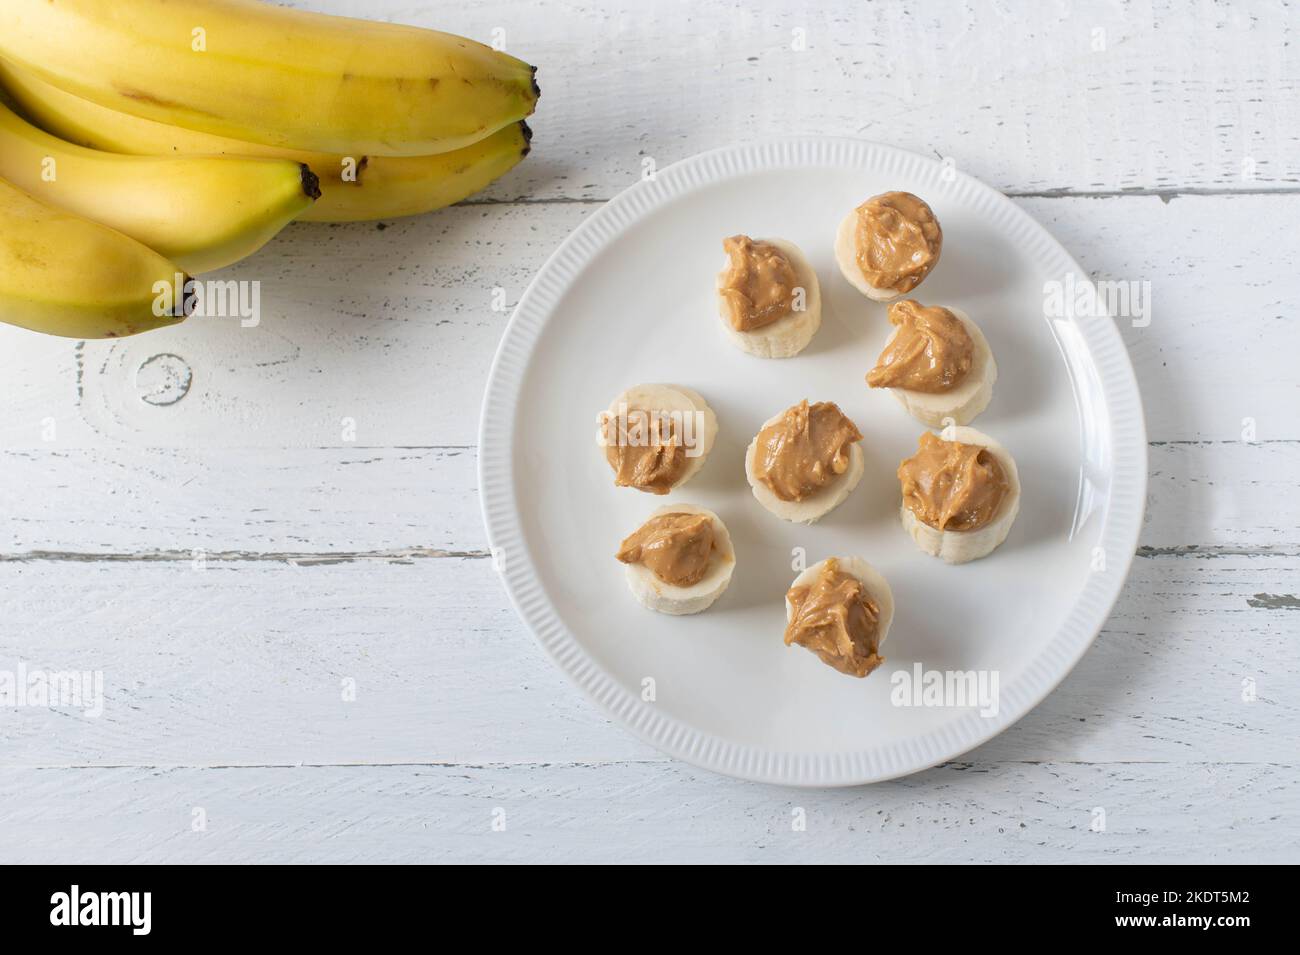 Banana with peanut butter topping on a plate Stock Photo